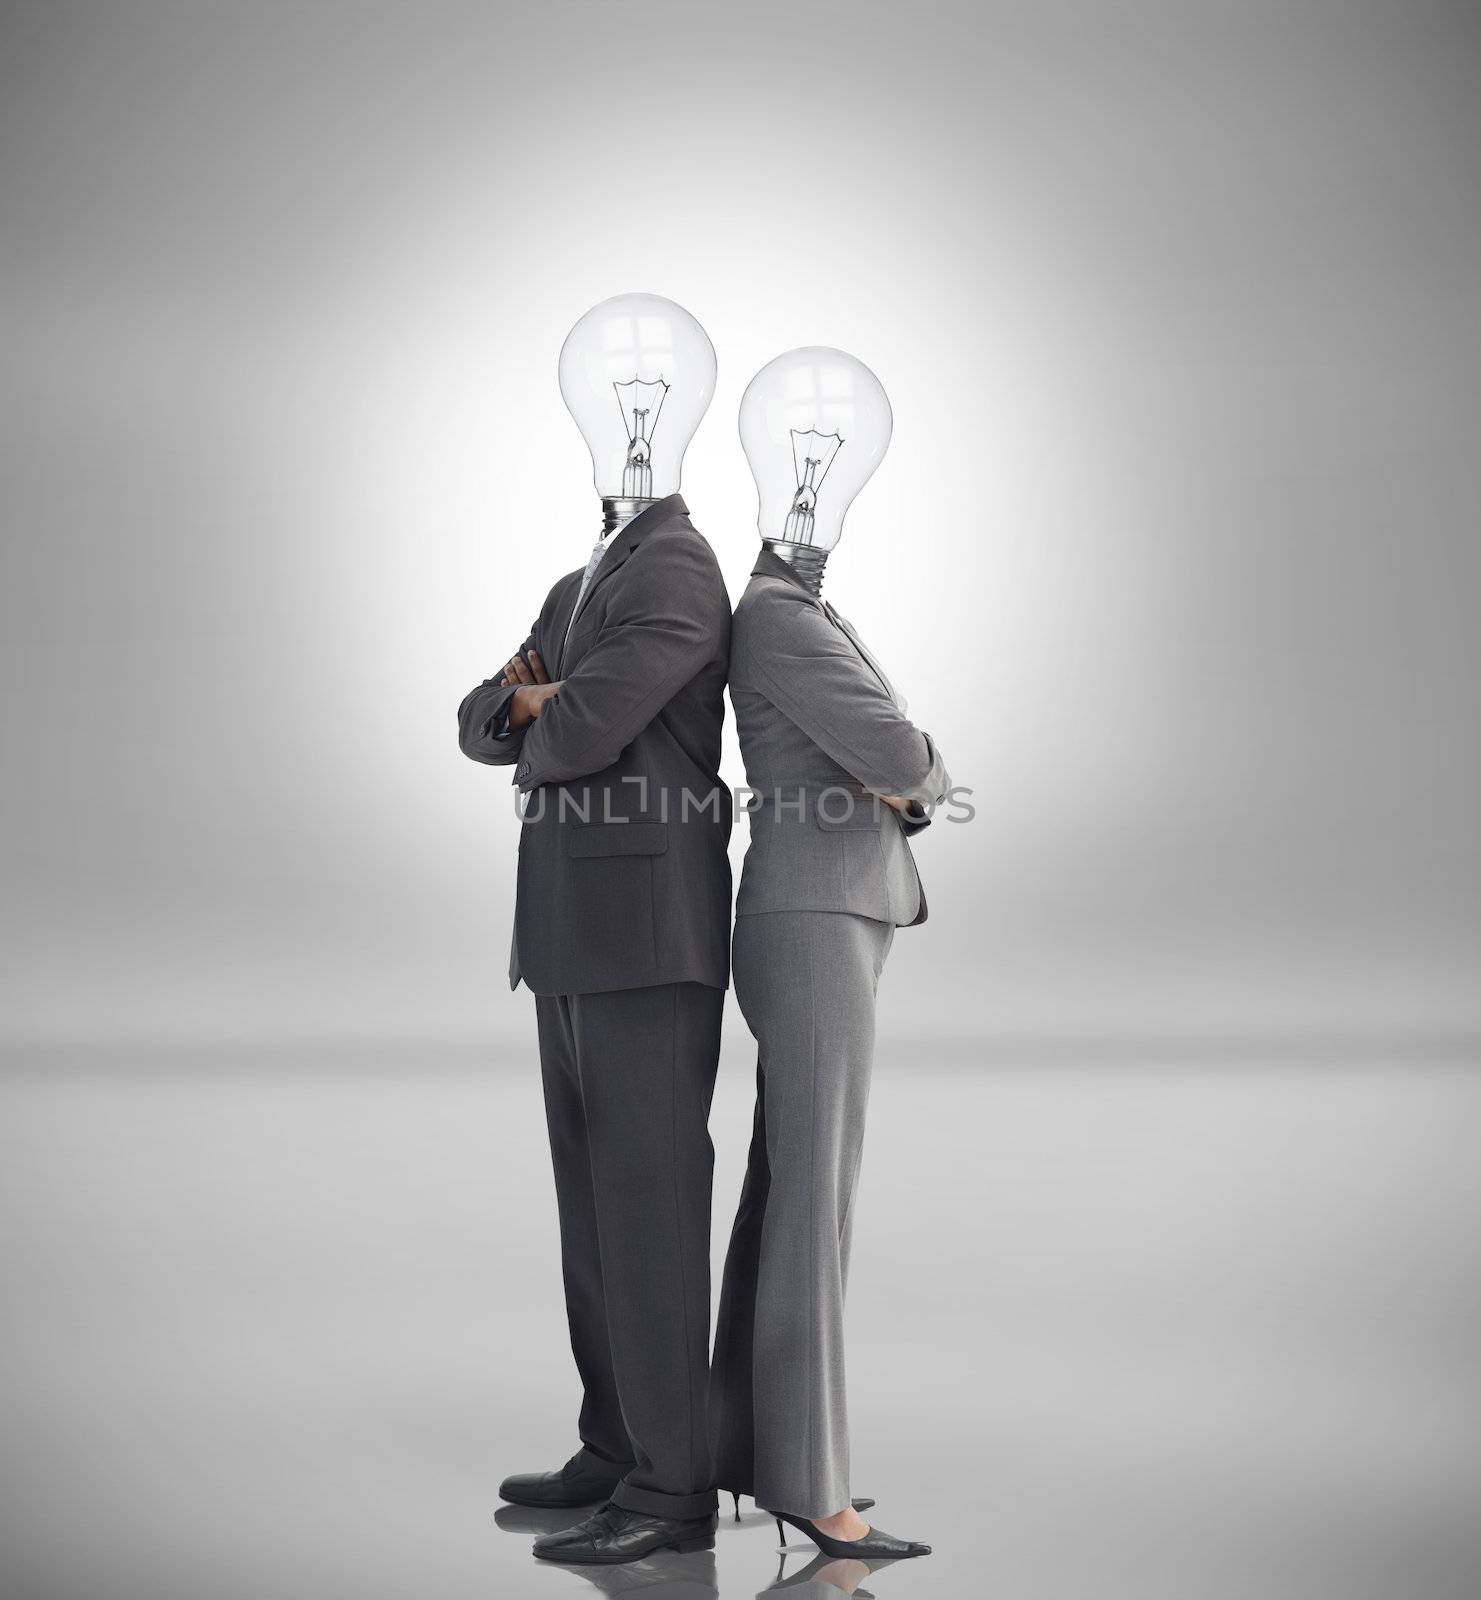 Business people with light bulbs instead of heads by Wavebreakmedia